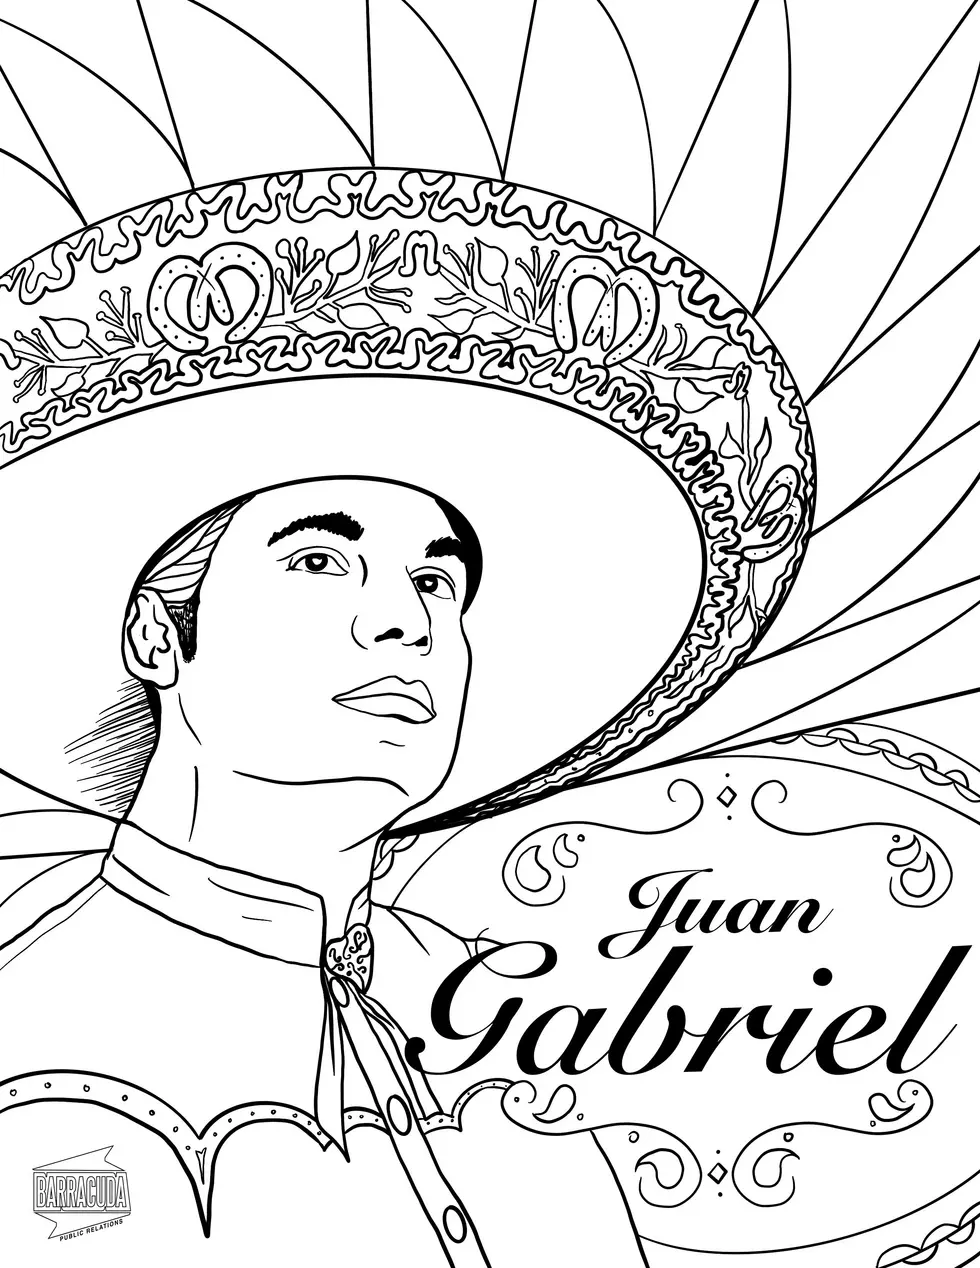 You Can Color El Paso Legends And Favorites With Quarantine Coloring Pages